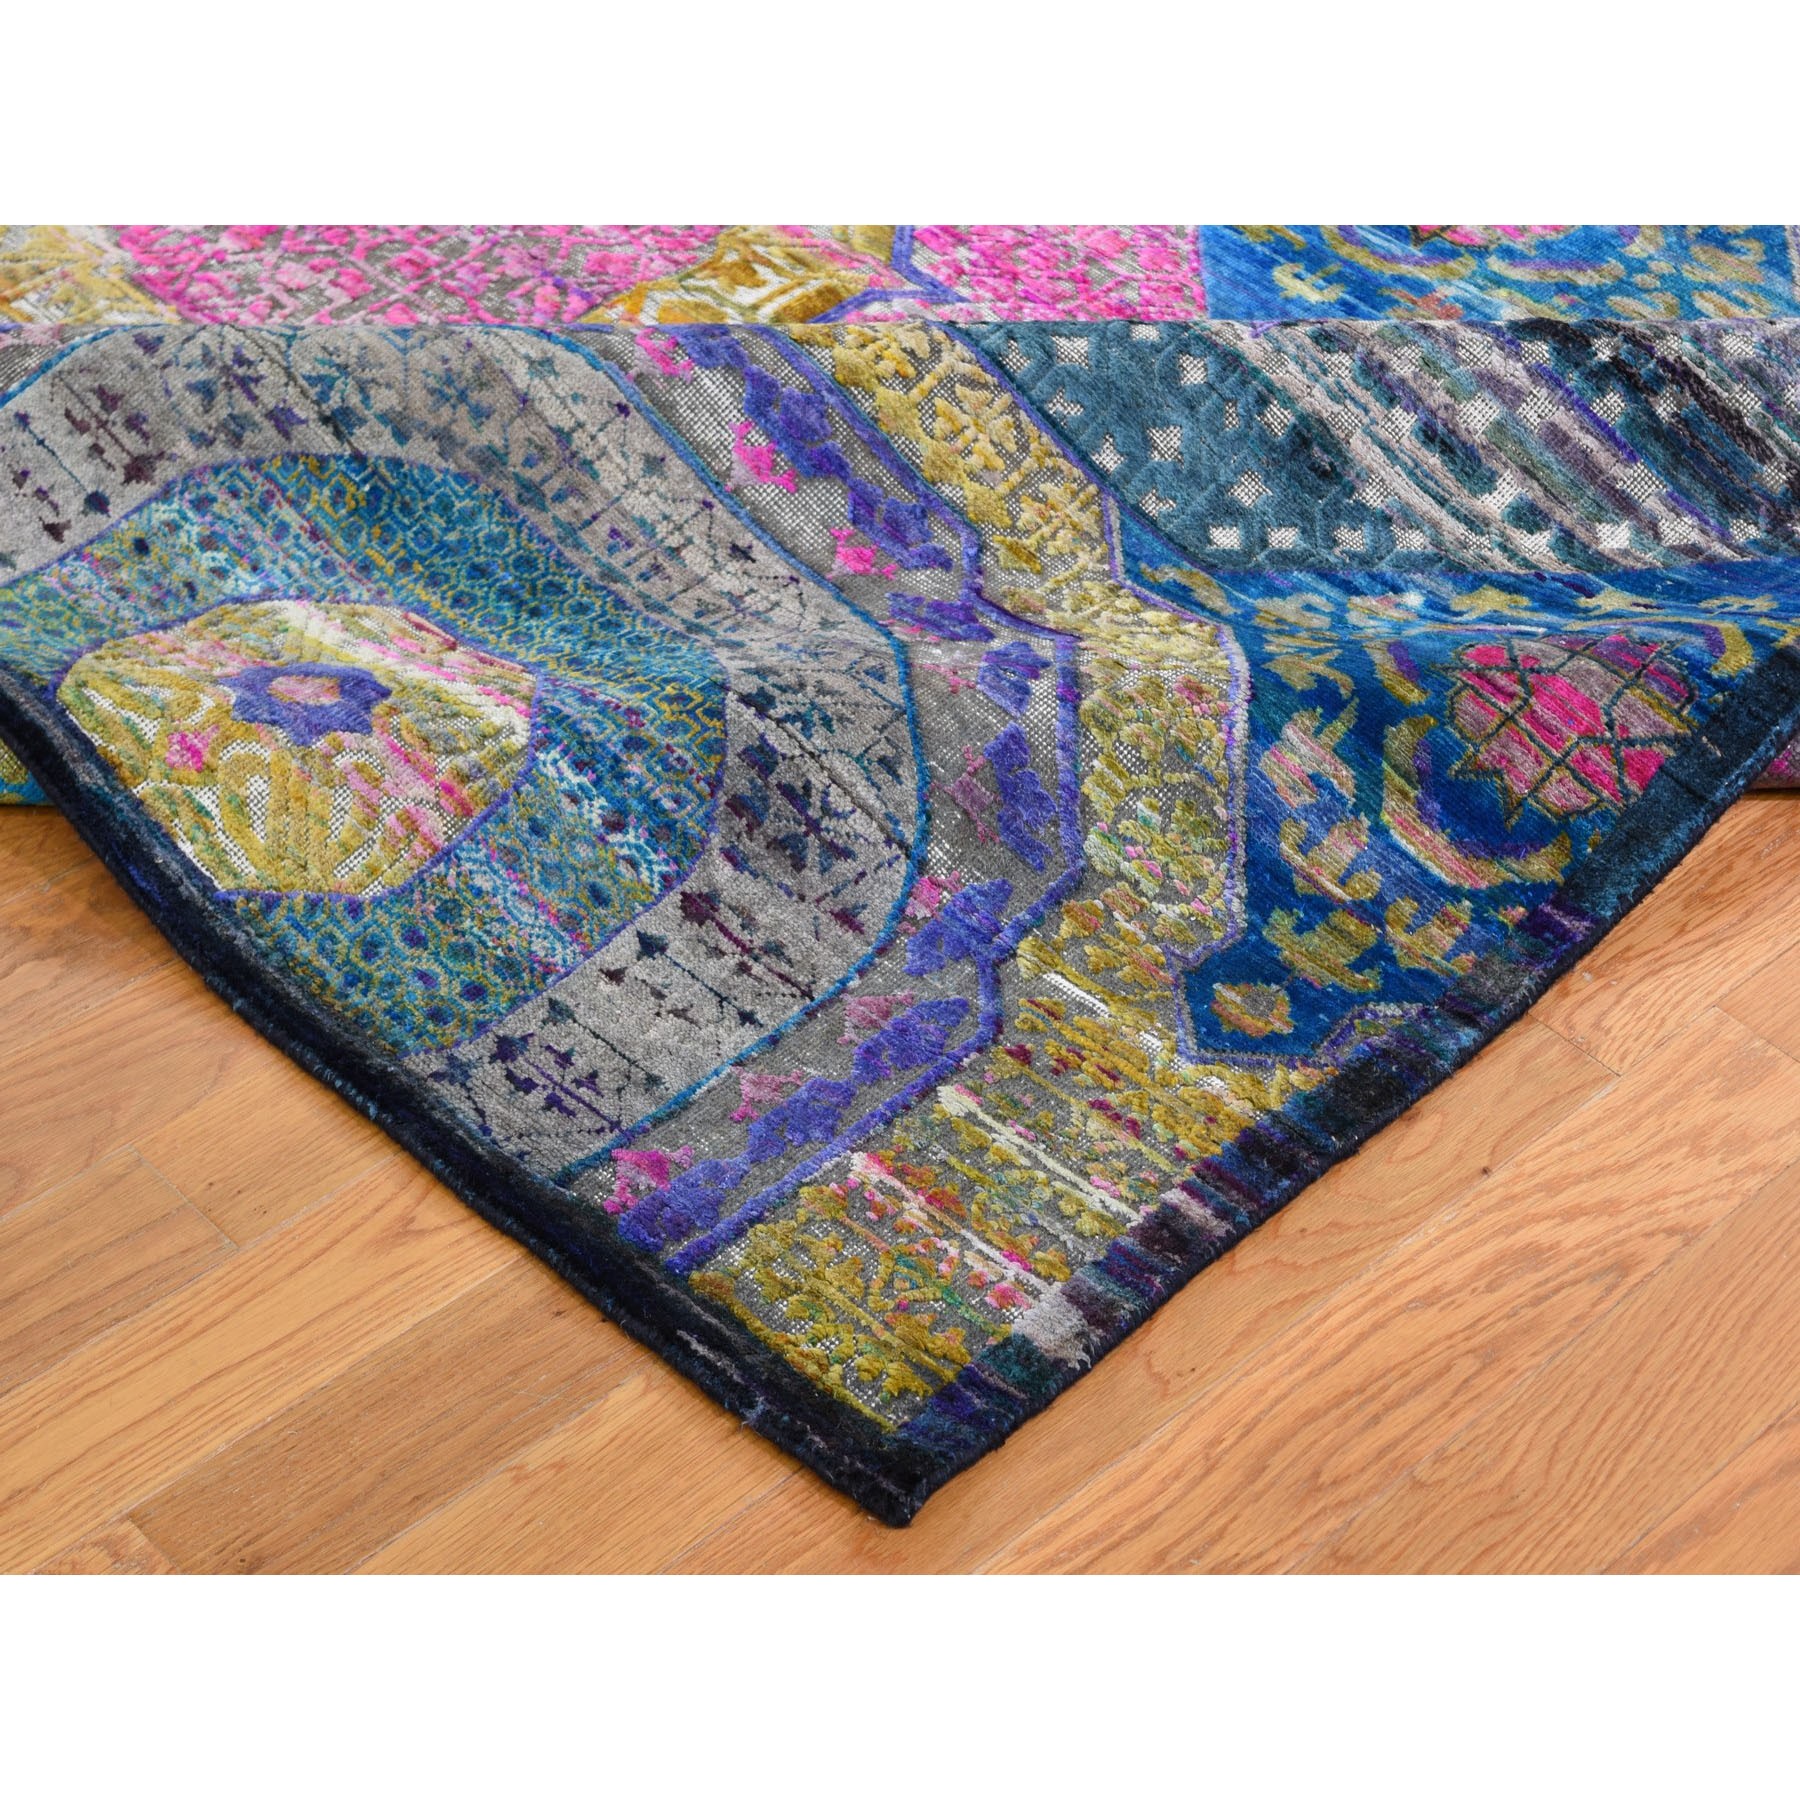 9-1 x12-5  Colorful Mamluk Design Sari Silk With Textured Wool Hand Knotted Oriental Rug 